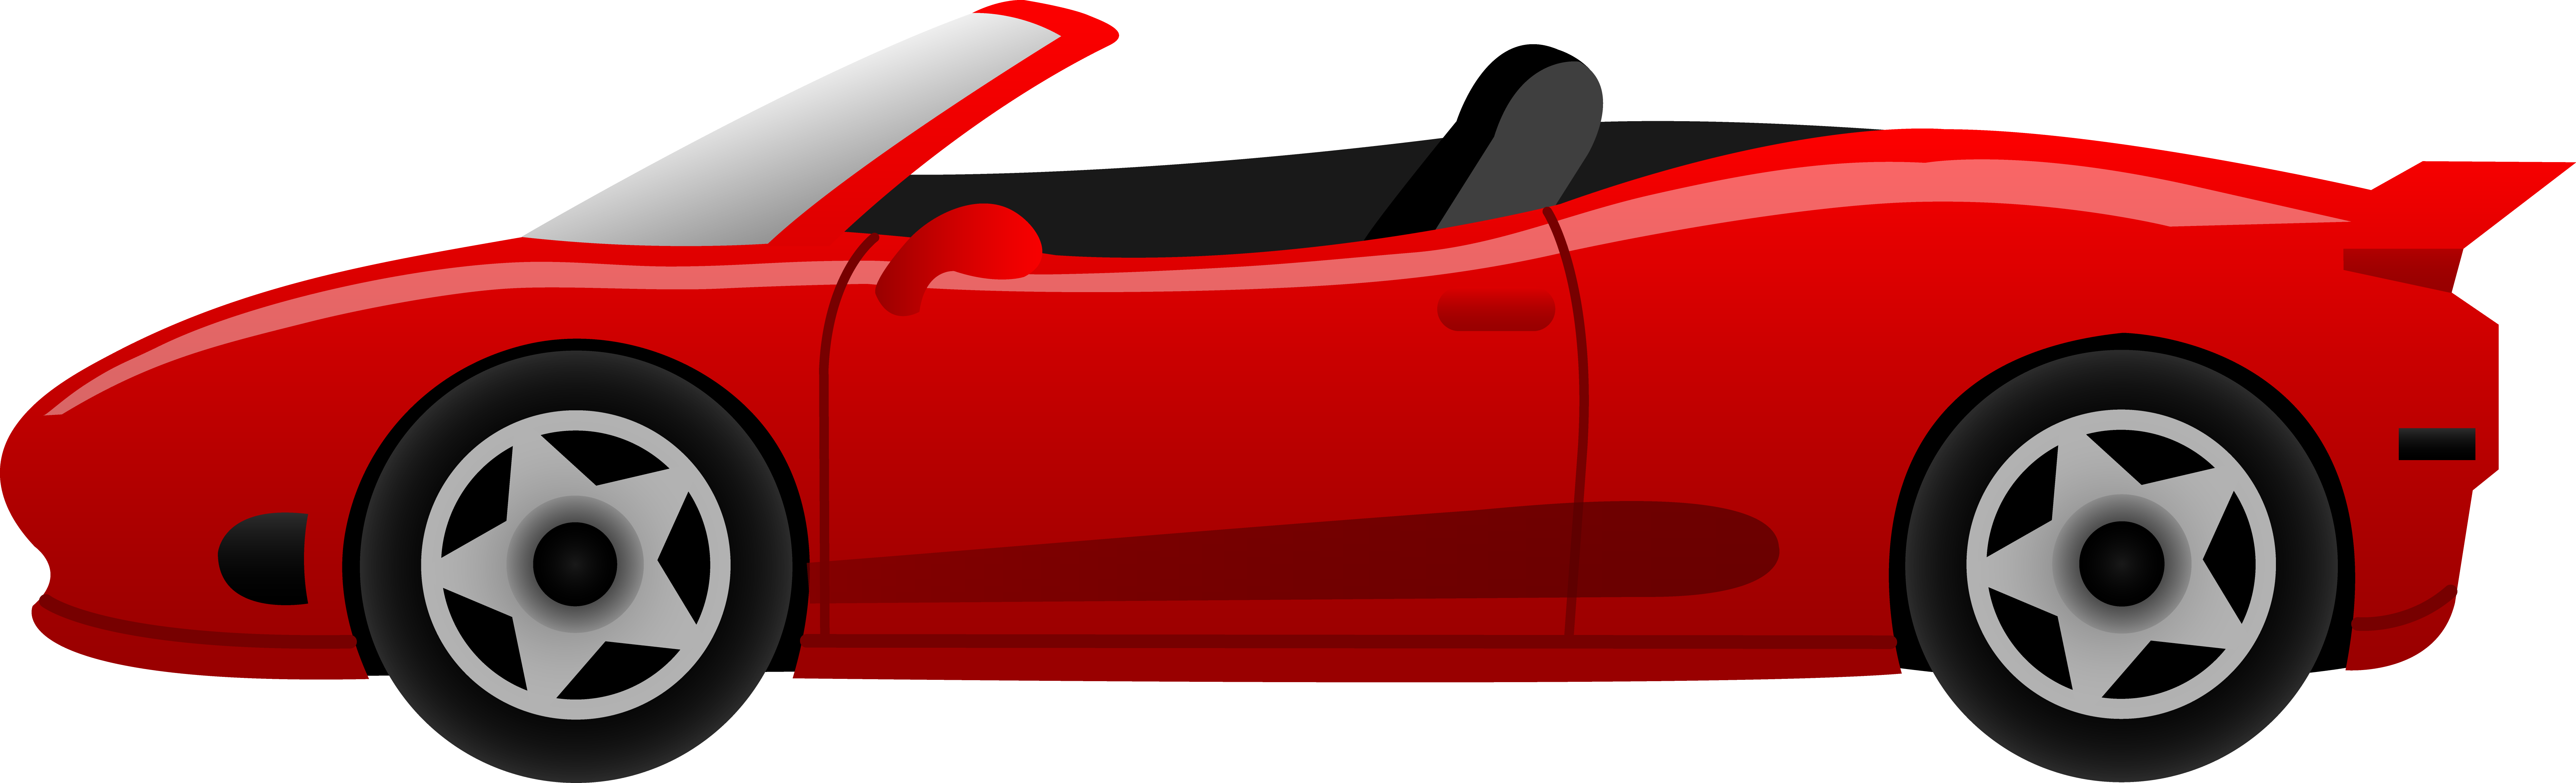 Sports Car Clipart Side View - Free Clipart Images